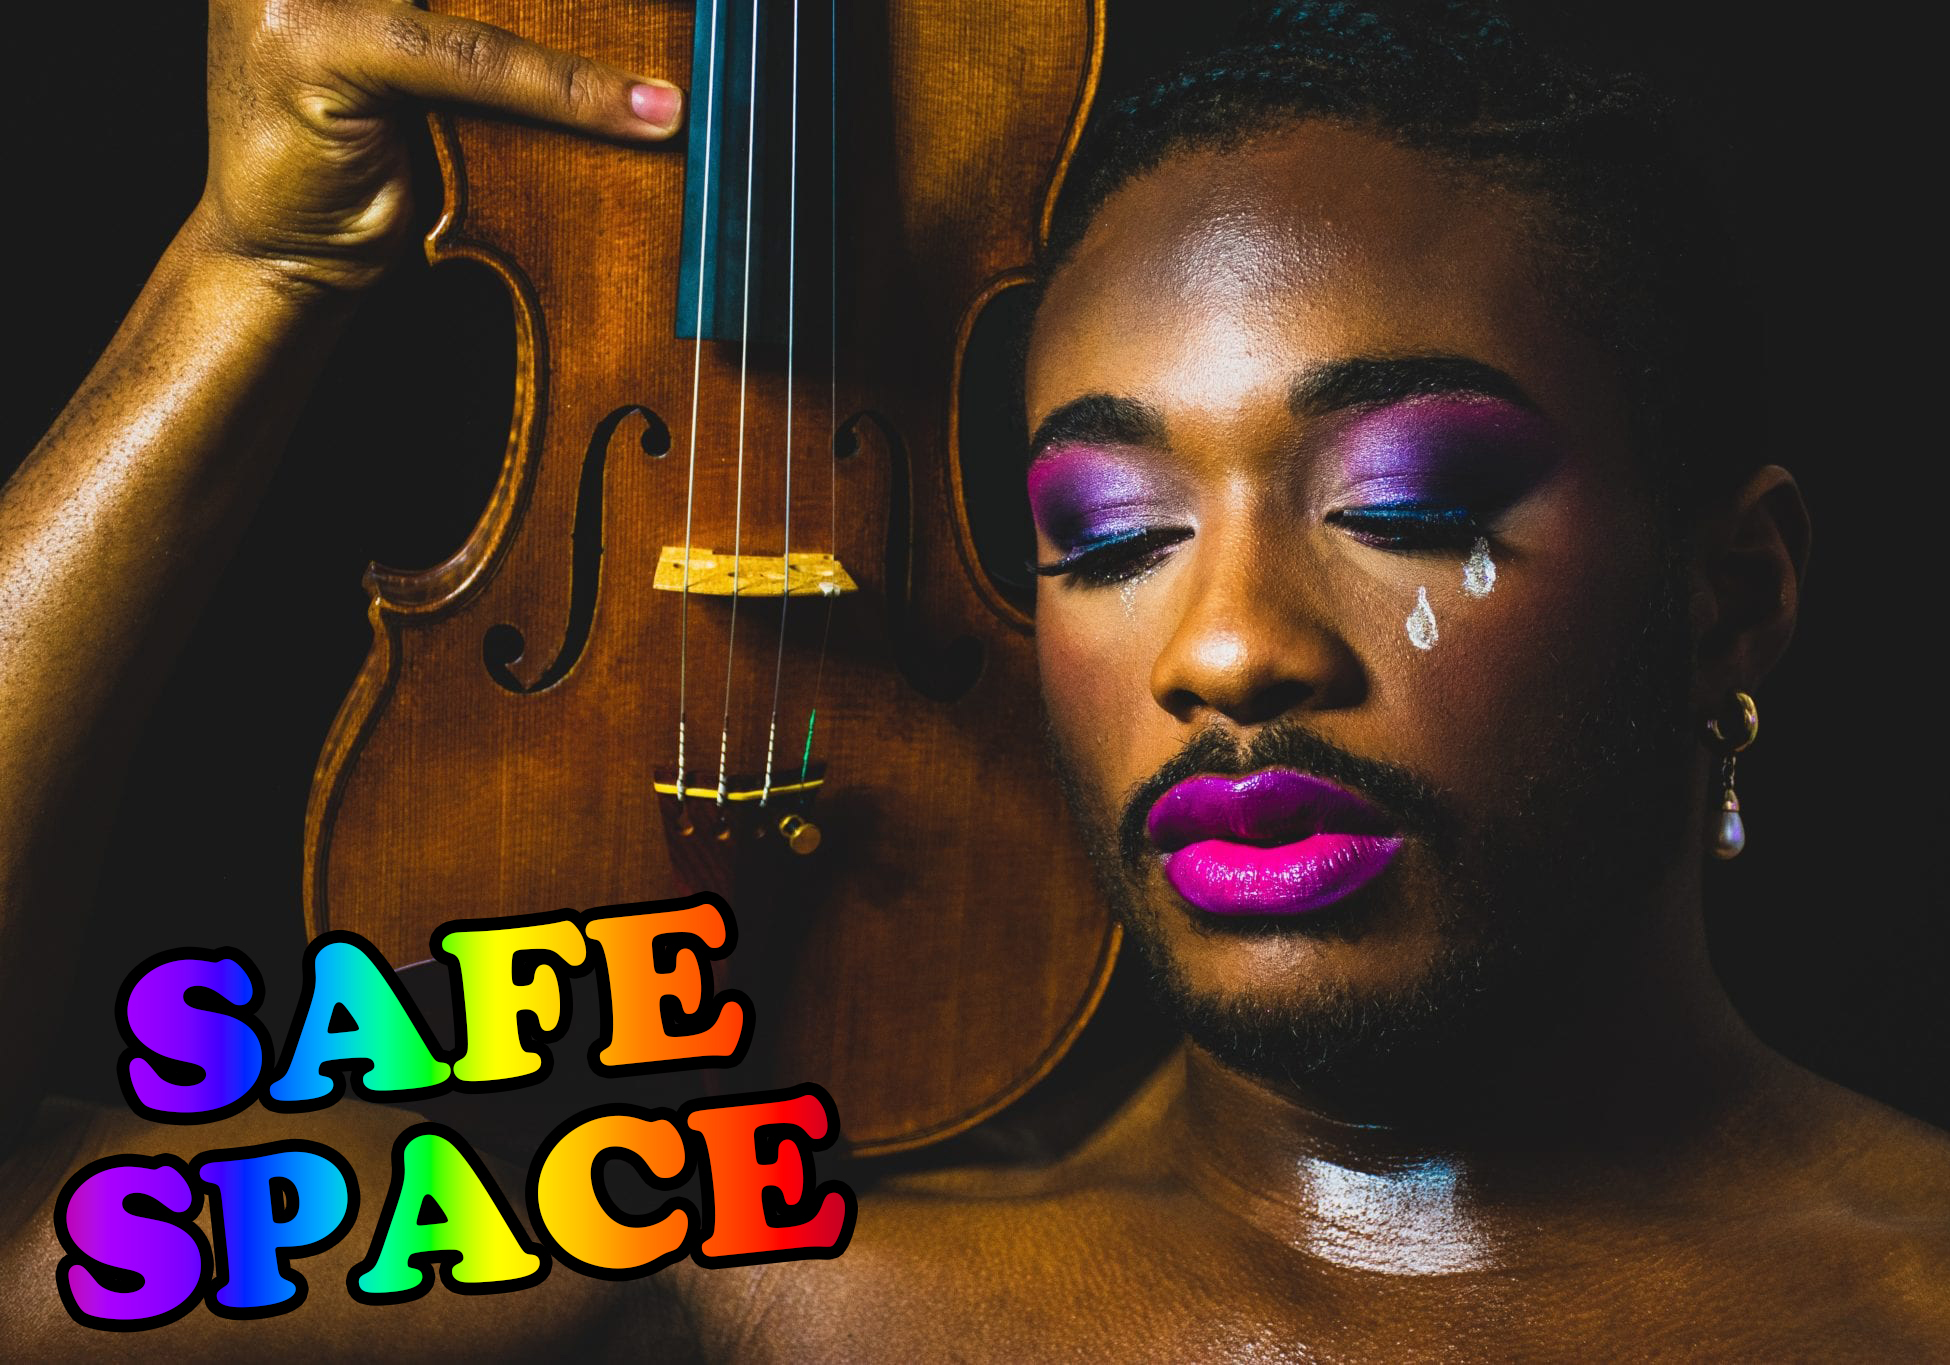 a beautiful black person wearing vivid purple eye makeup and lipstick with two white tears painted on their cheek holds a violin propped upright over their right shoulder; rainbow text reads "SAFE SPACE"